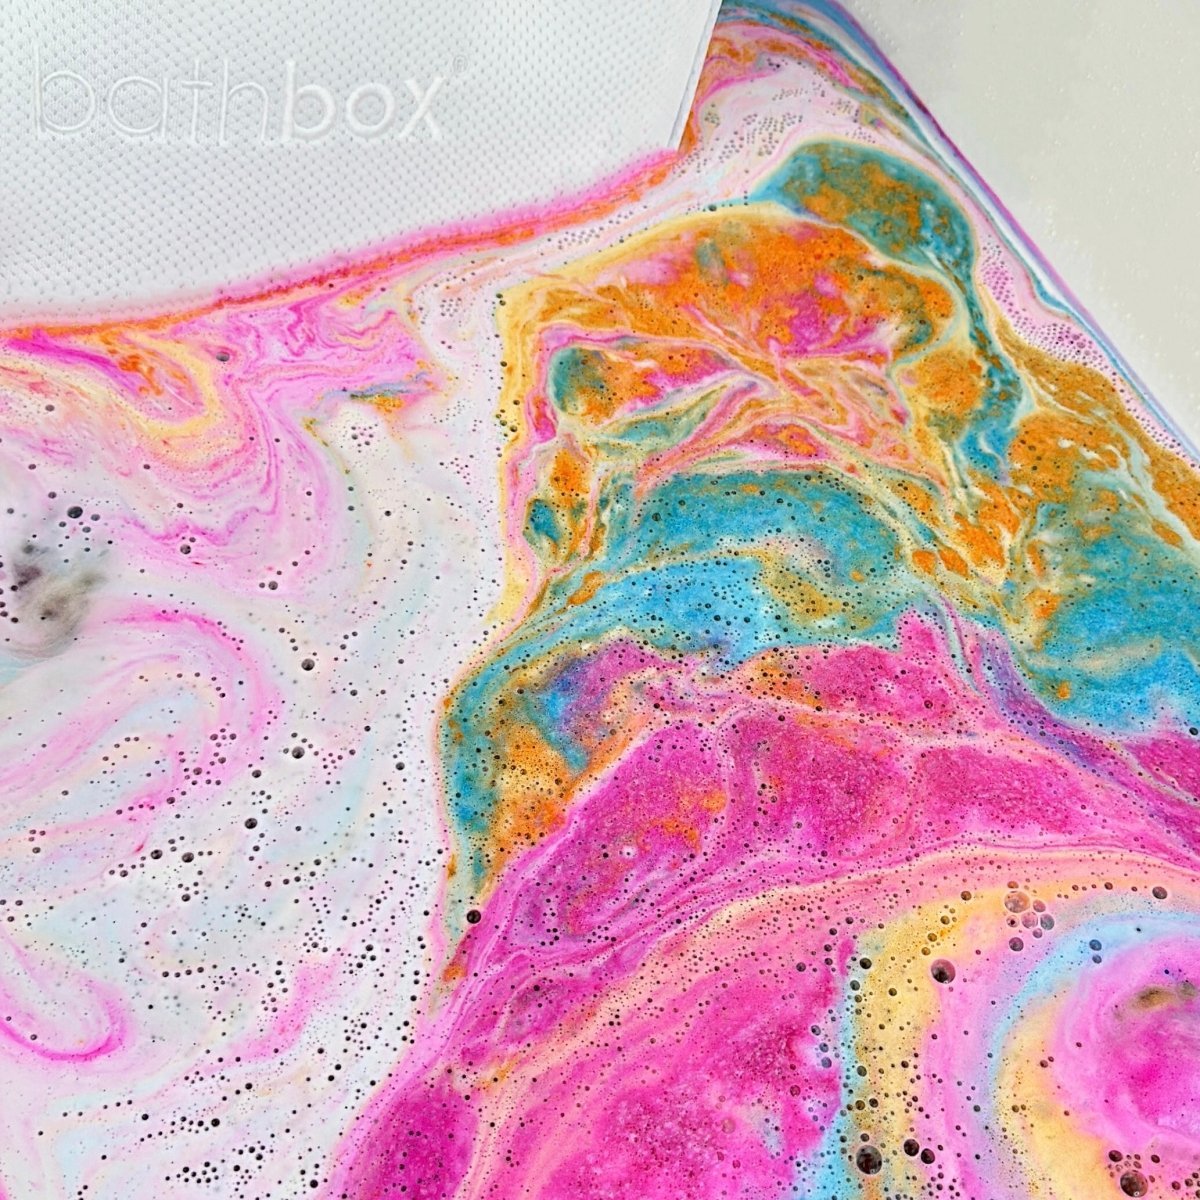 Masquerade Bath Bomb for Kids & Adults - Large Colourful Glitters & Marshmallow Fragrance - Made in Australia by Bath Box